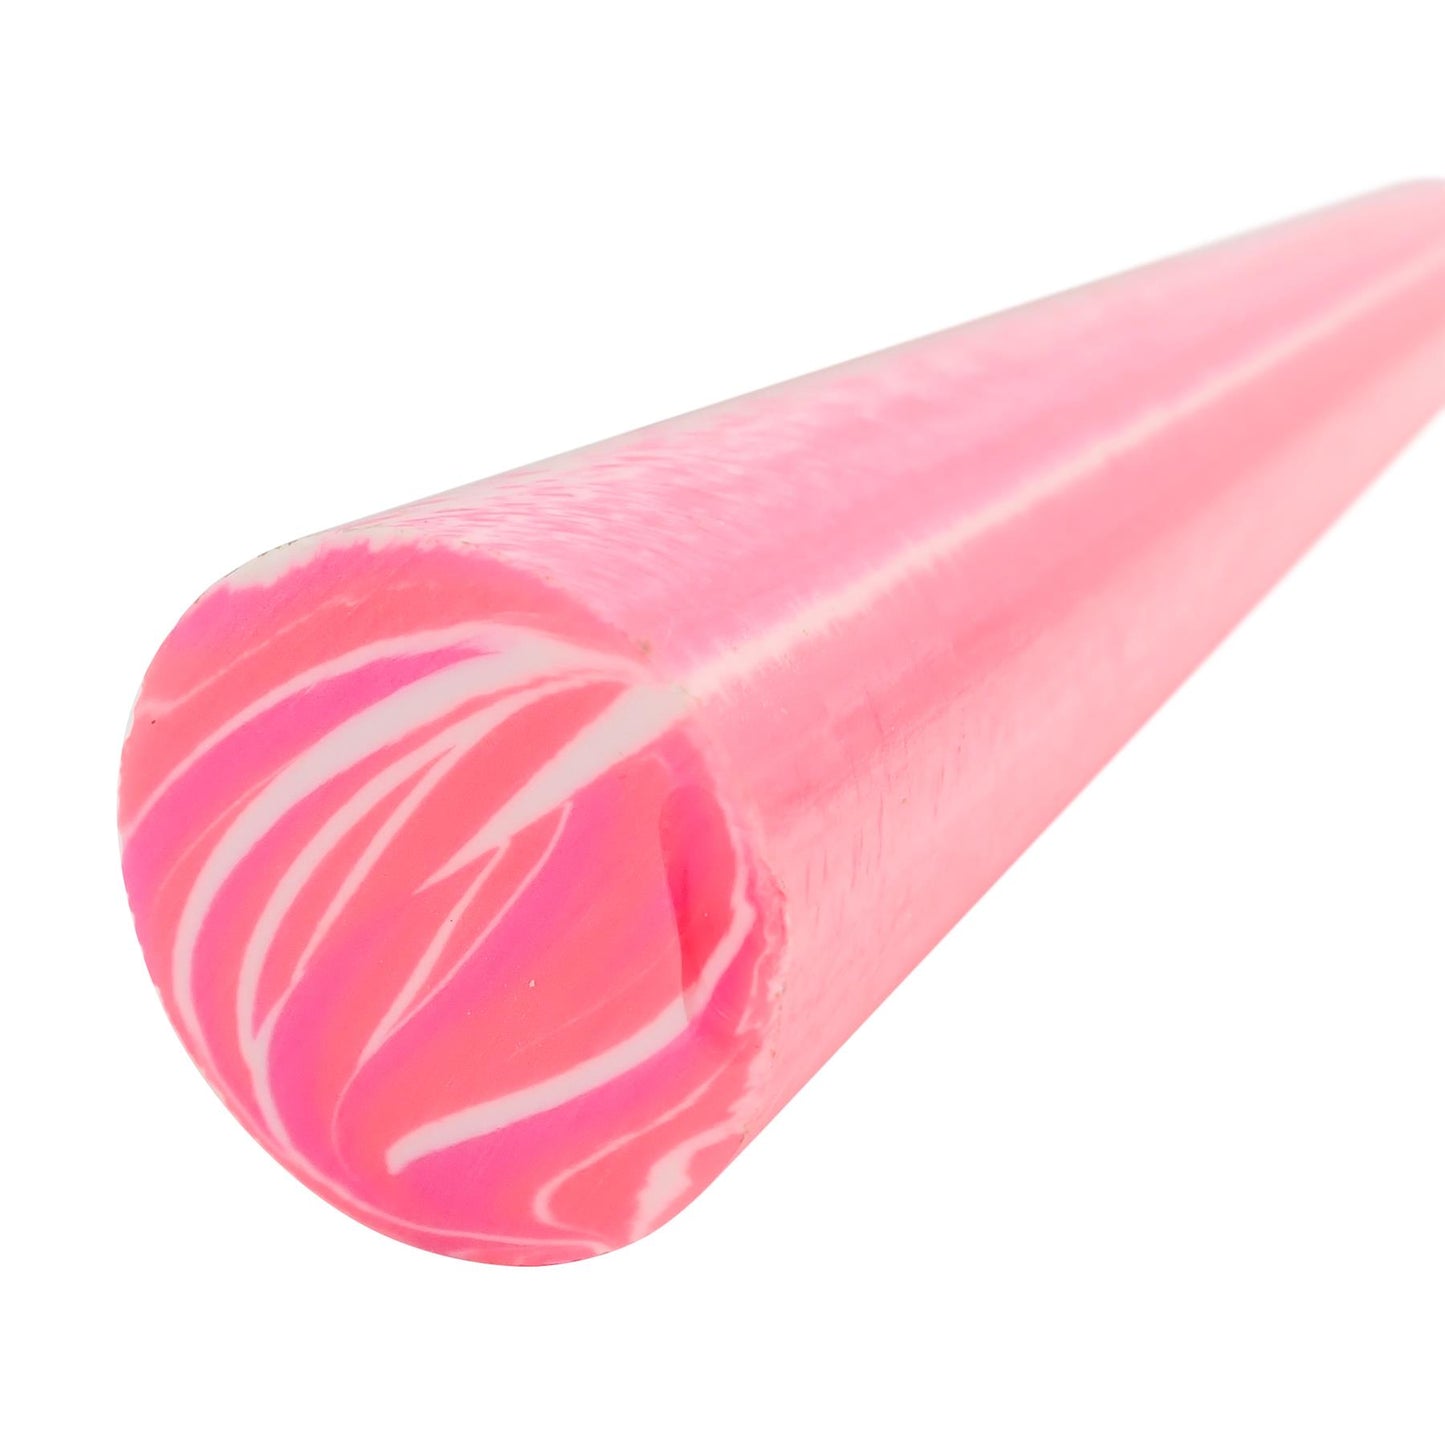 Turners' Mill Shocking Pink Polyester Turning Blank - 150x45x45mm